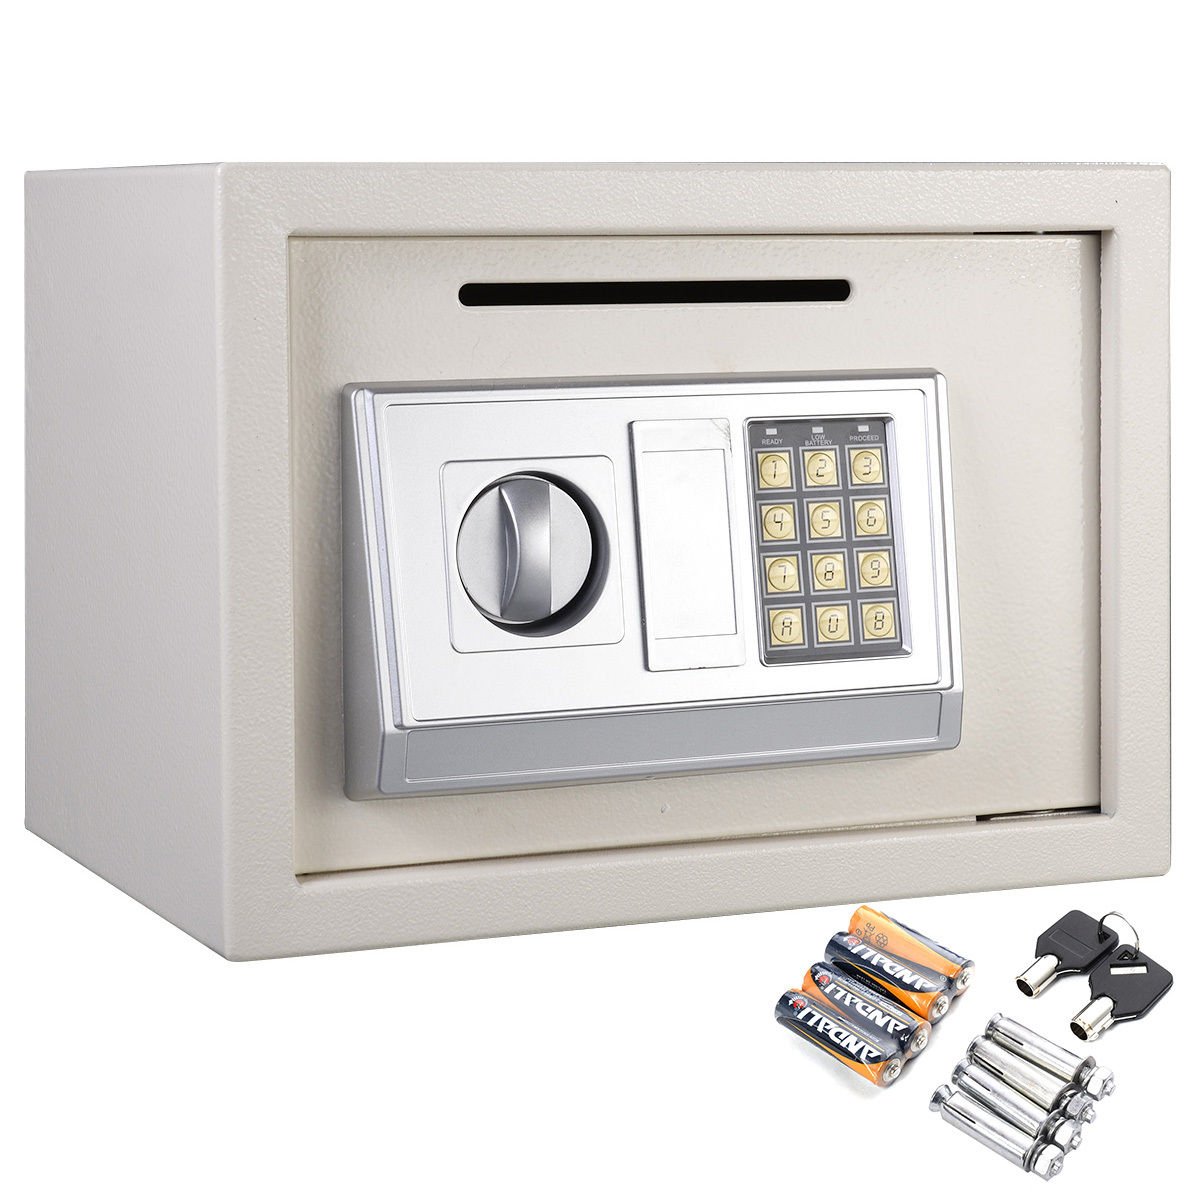 Globe House Products GHP Home Hotel White 14" Digital Depository Drop Jewelry Cash Safe Box